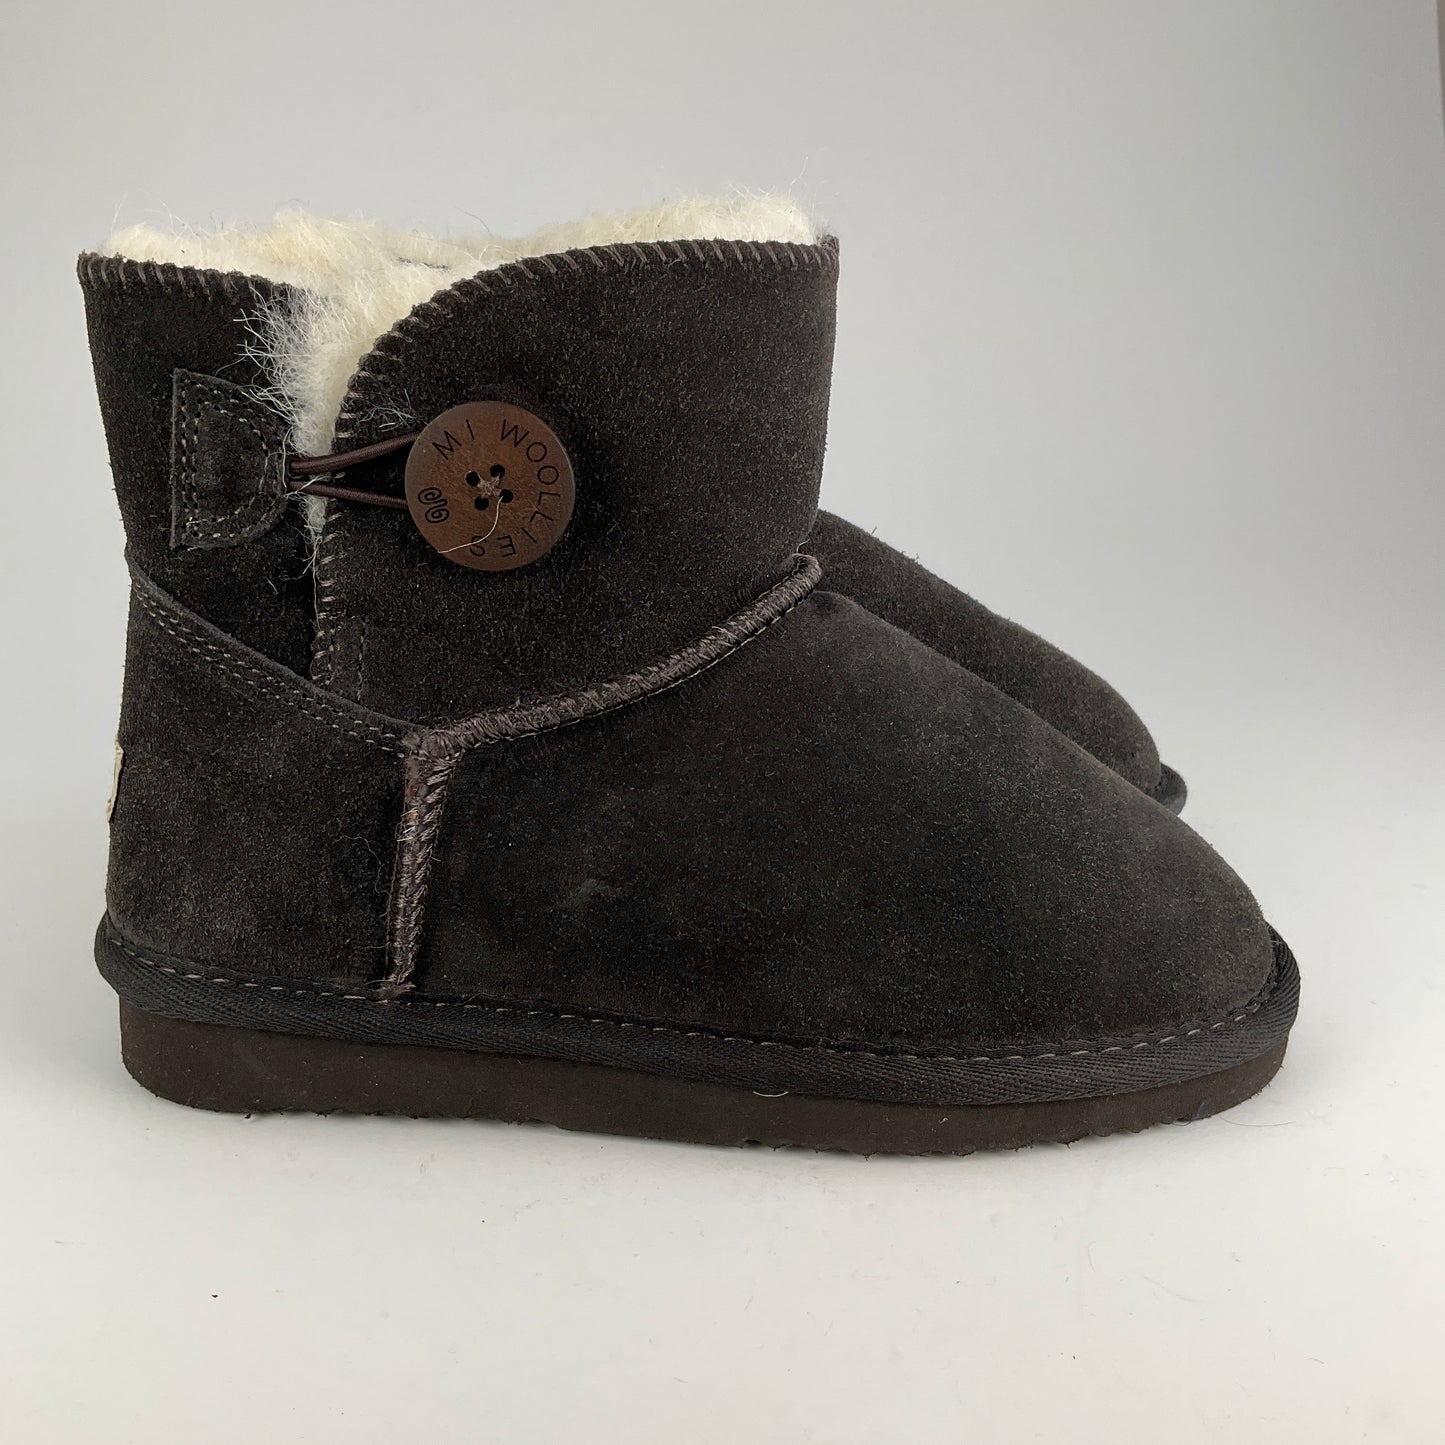 Uggs - Wool Slippers - Size 5